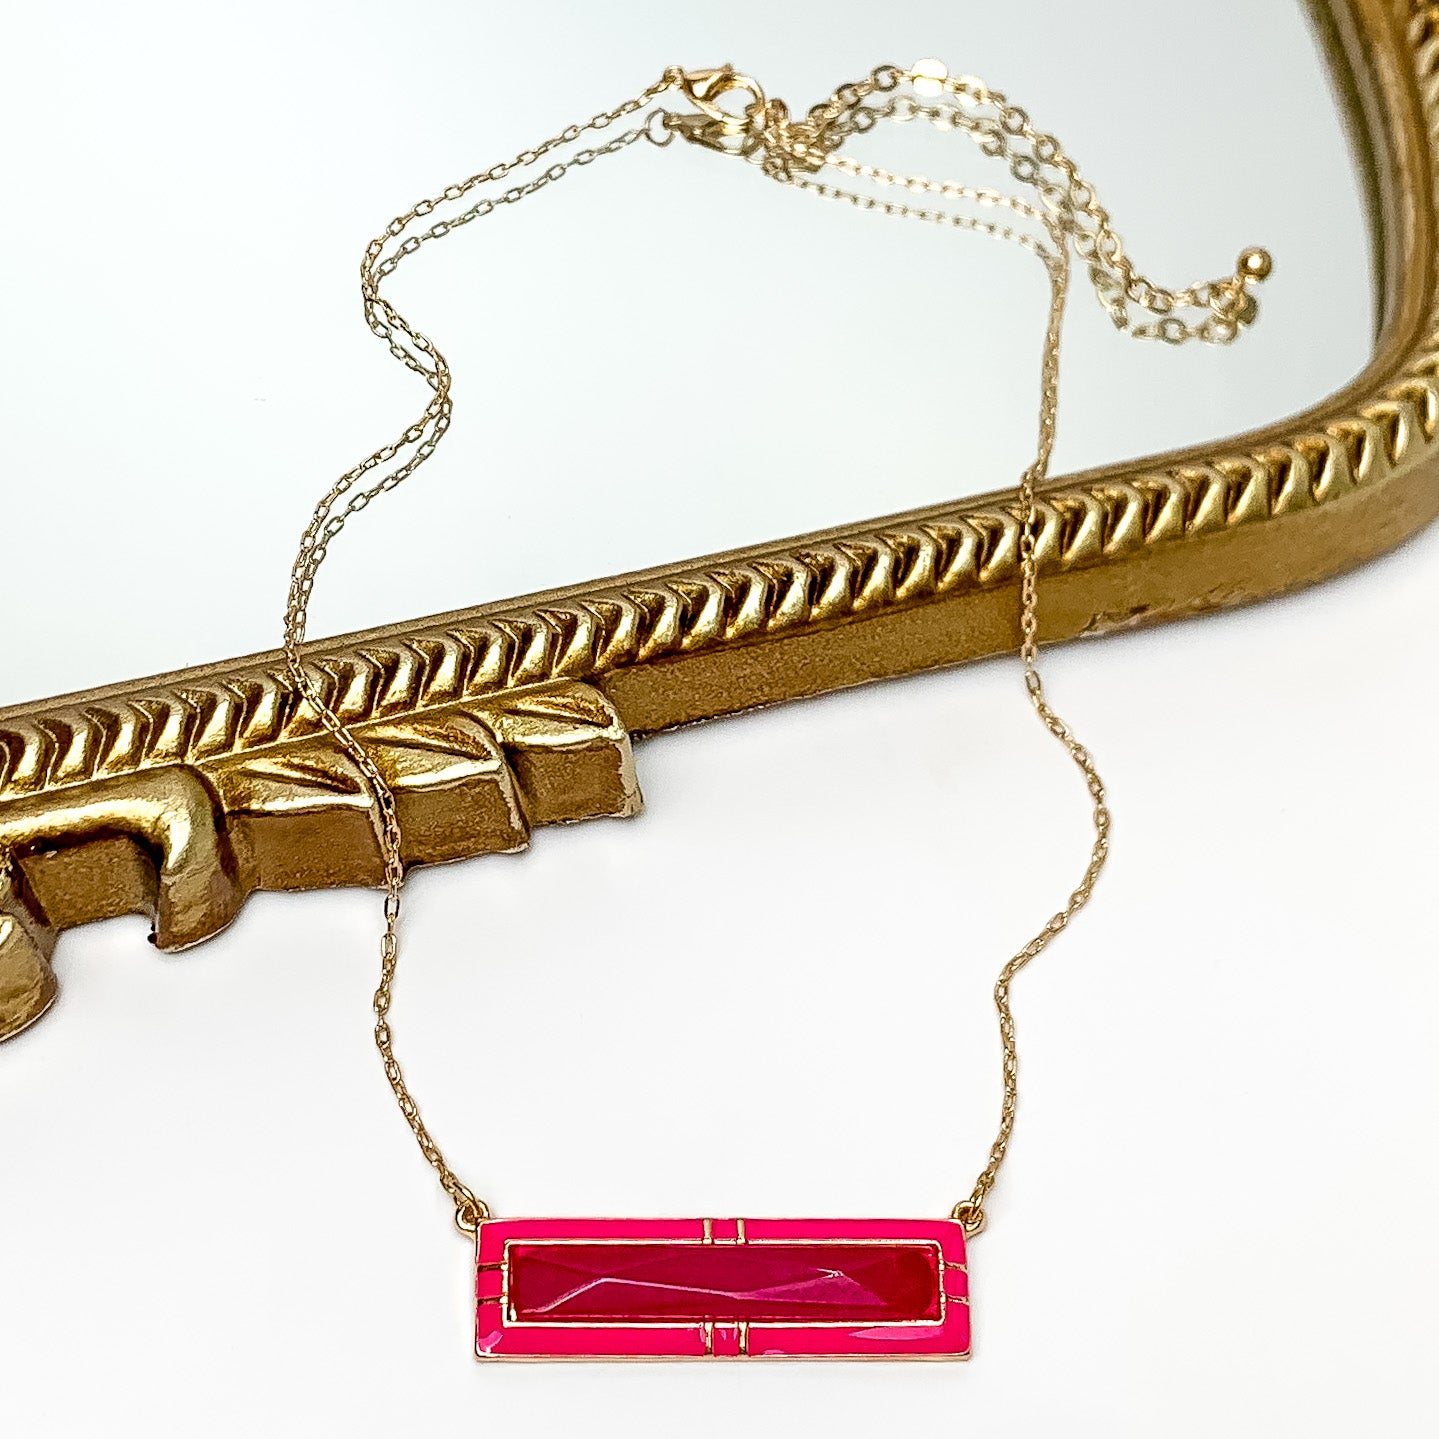 Everyday Gold Tone Chain Necklace With Rectangular Pendant in Fuchsia - Giddy Up Glamour Boutique